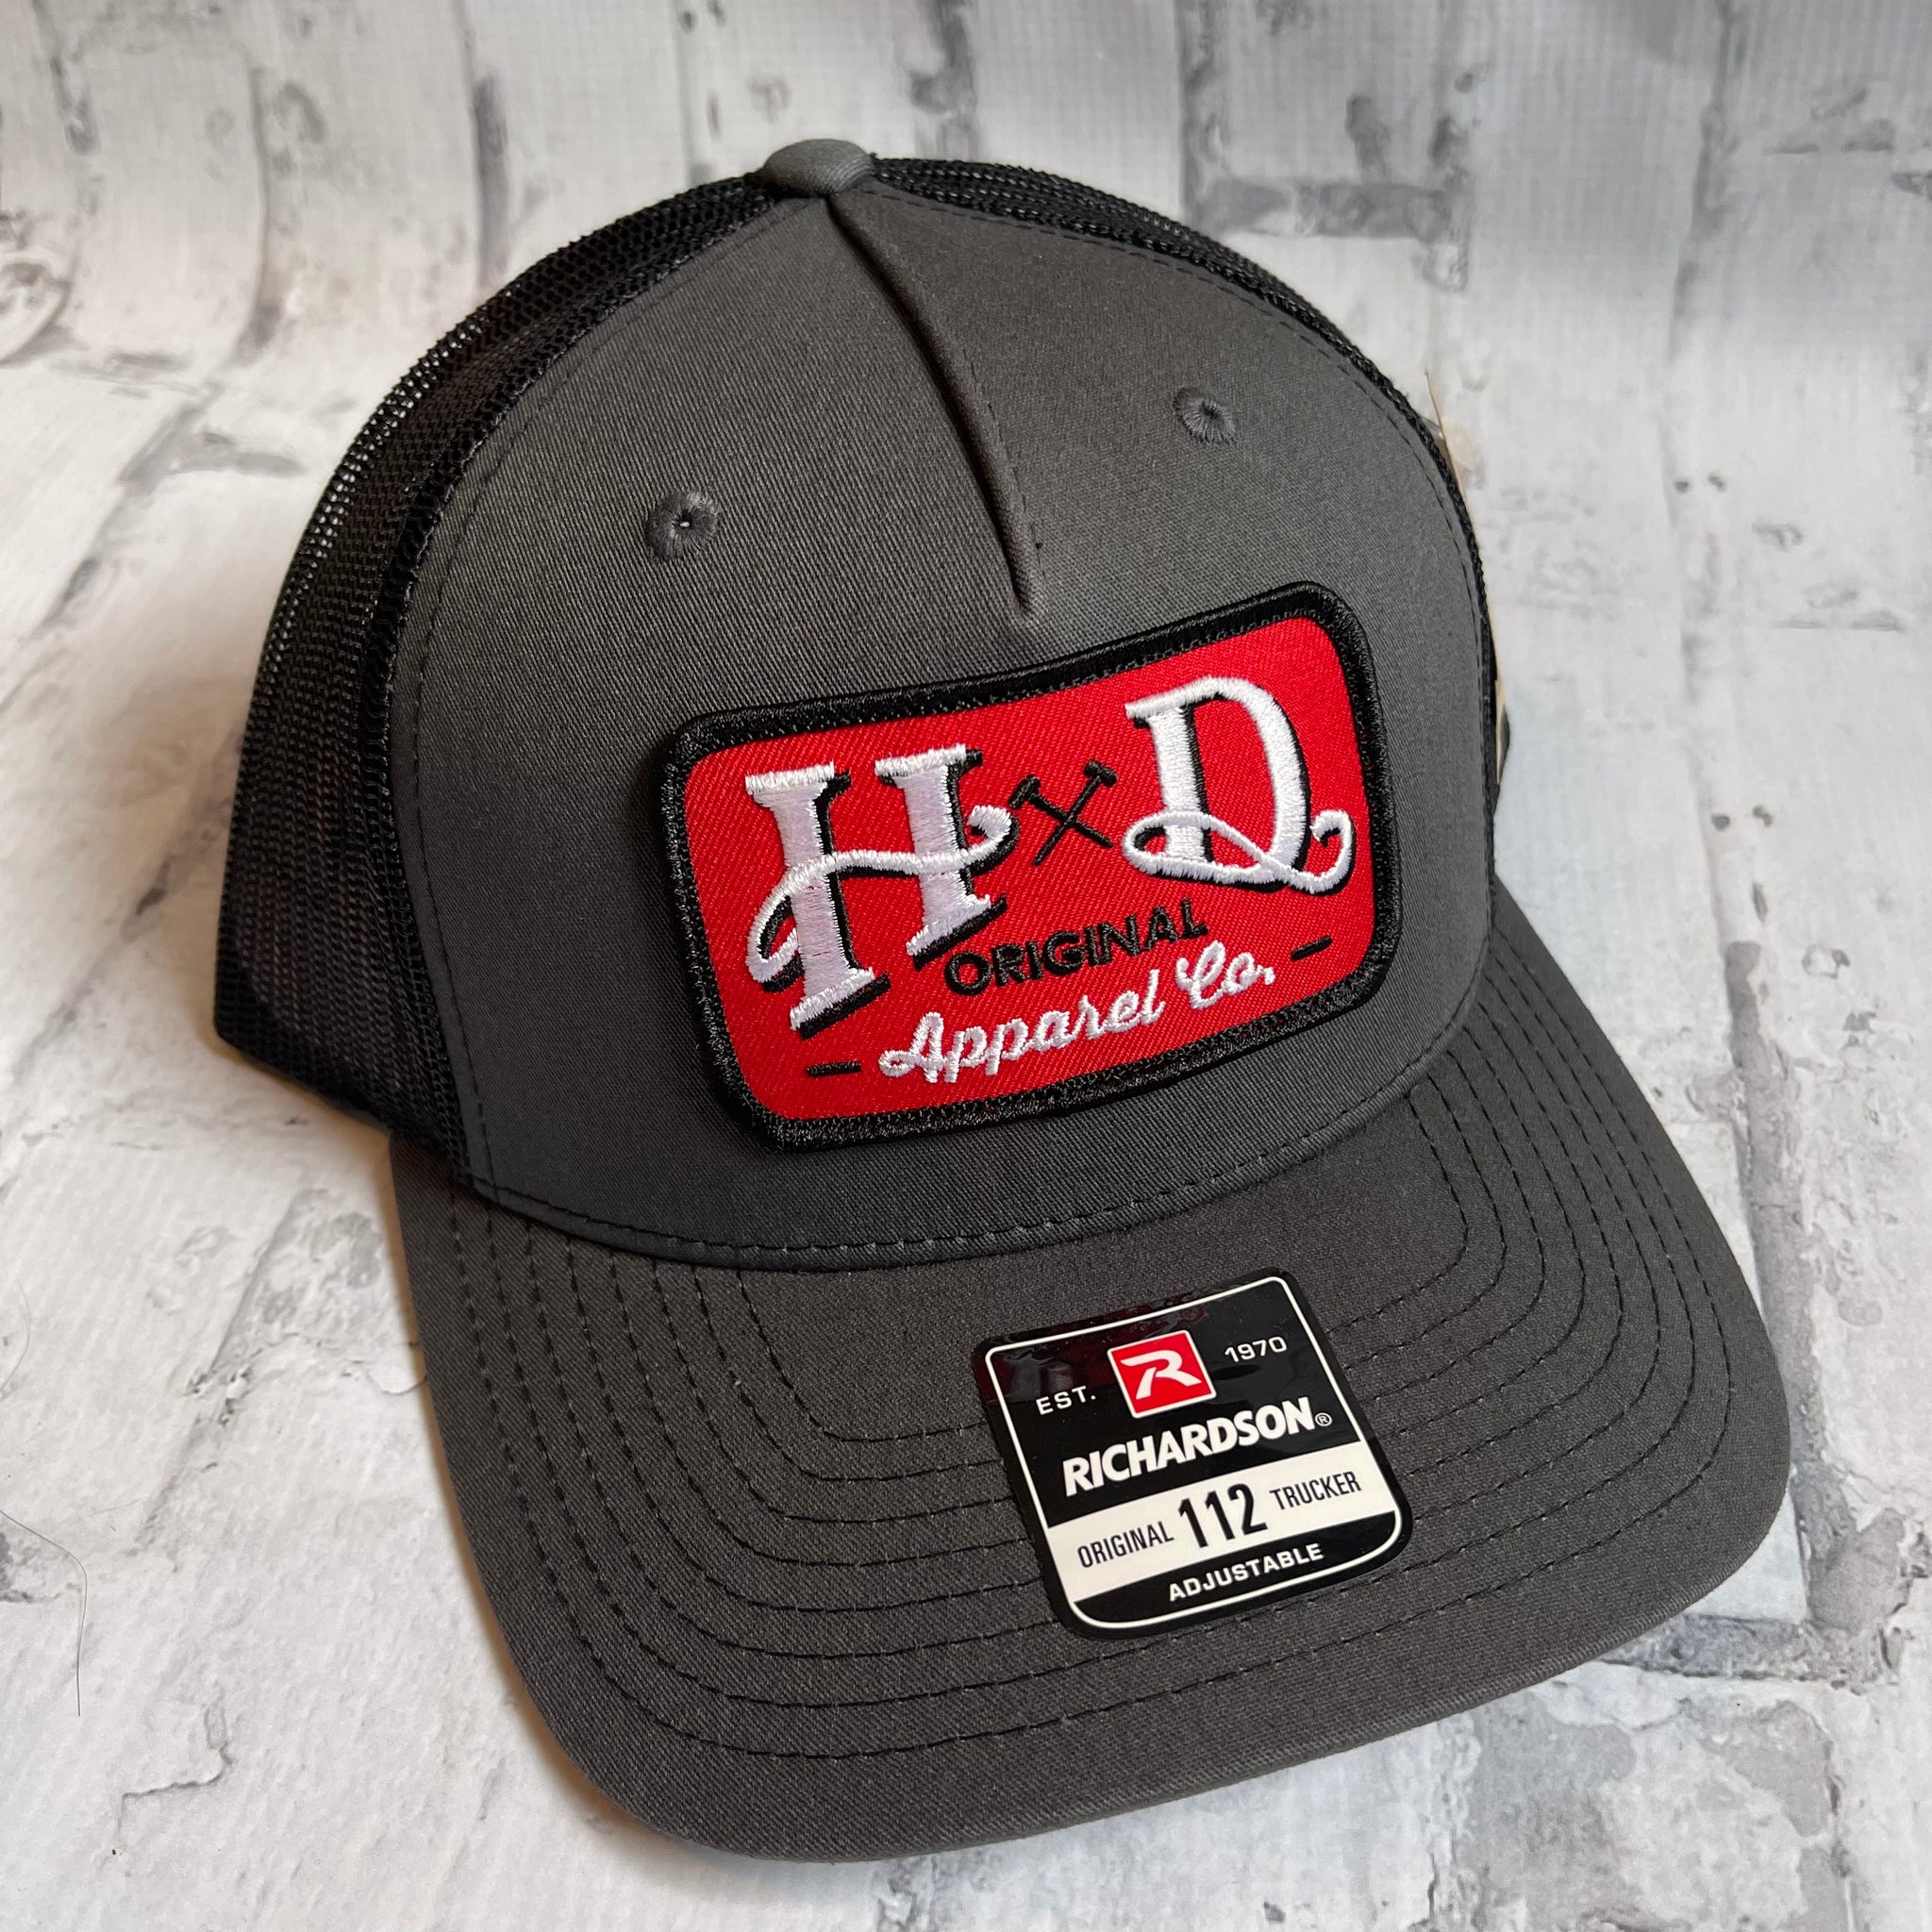 Hammer Down "Work Wear" Hat - Charcoal with Woven Patch - Southern Charm "Shop The Charm"